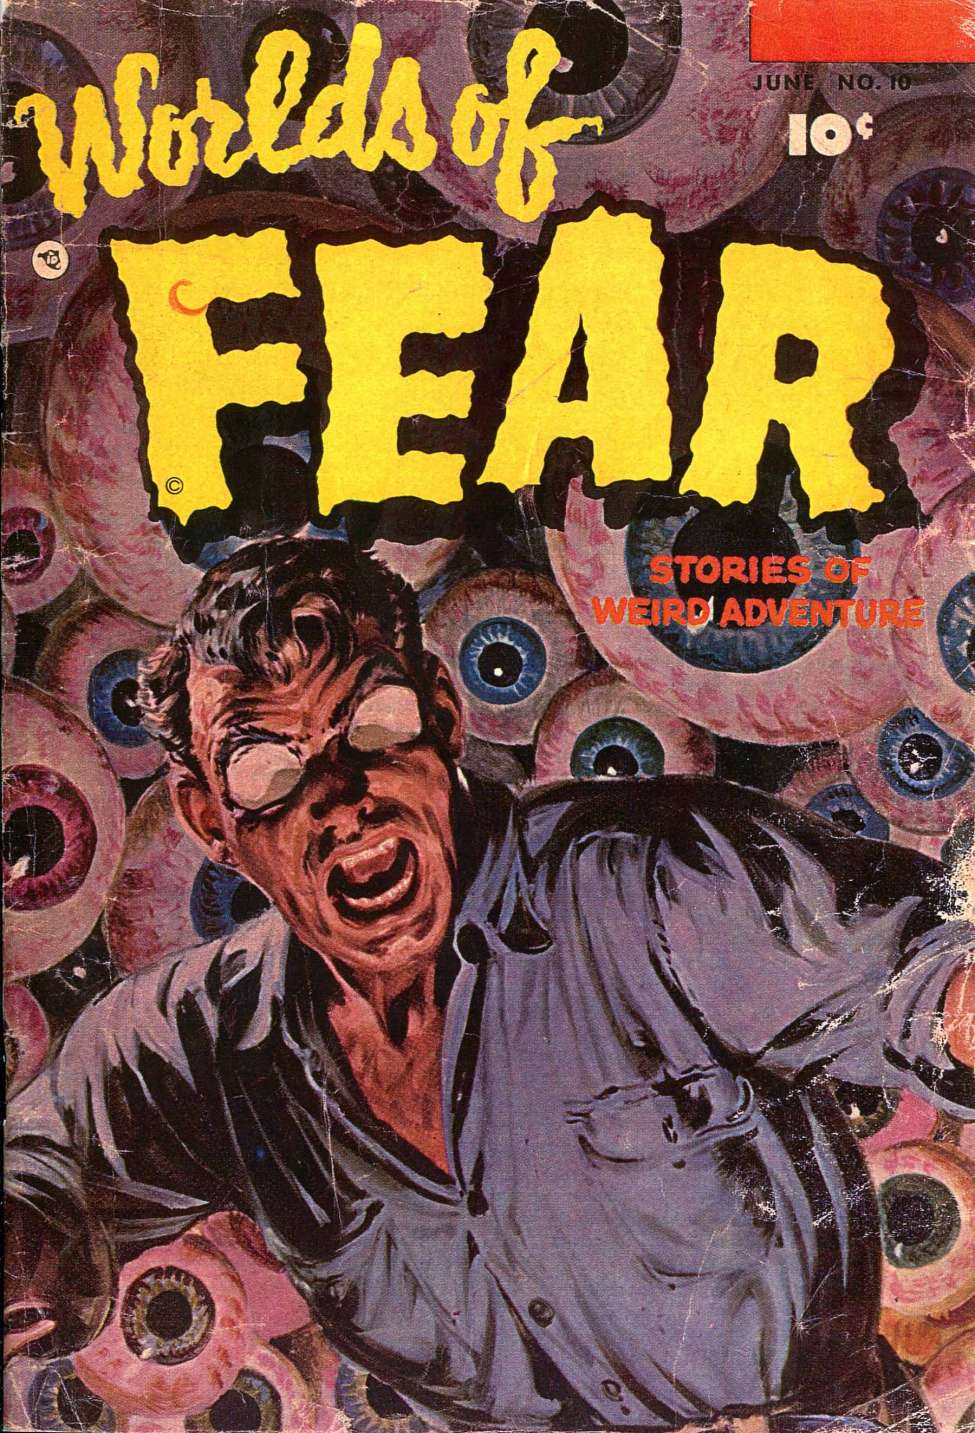 Book Cover For Worlds of Fear 10